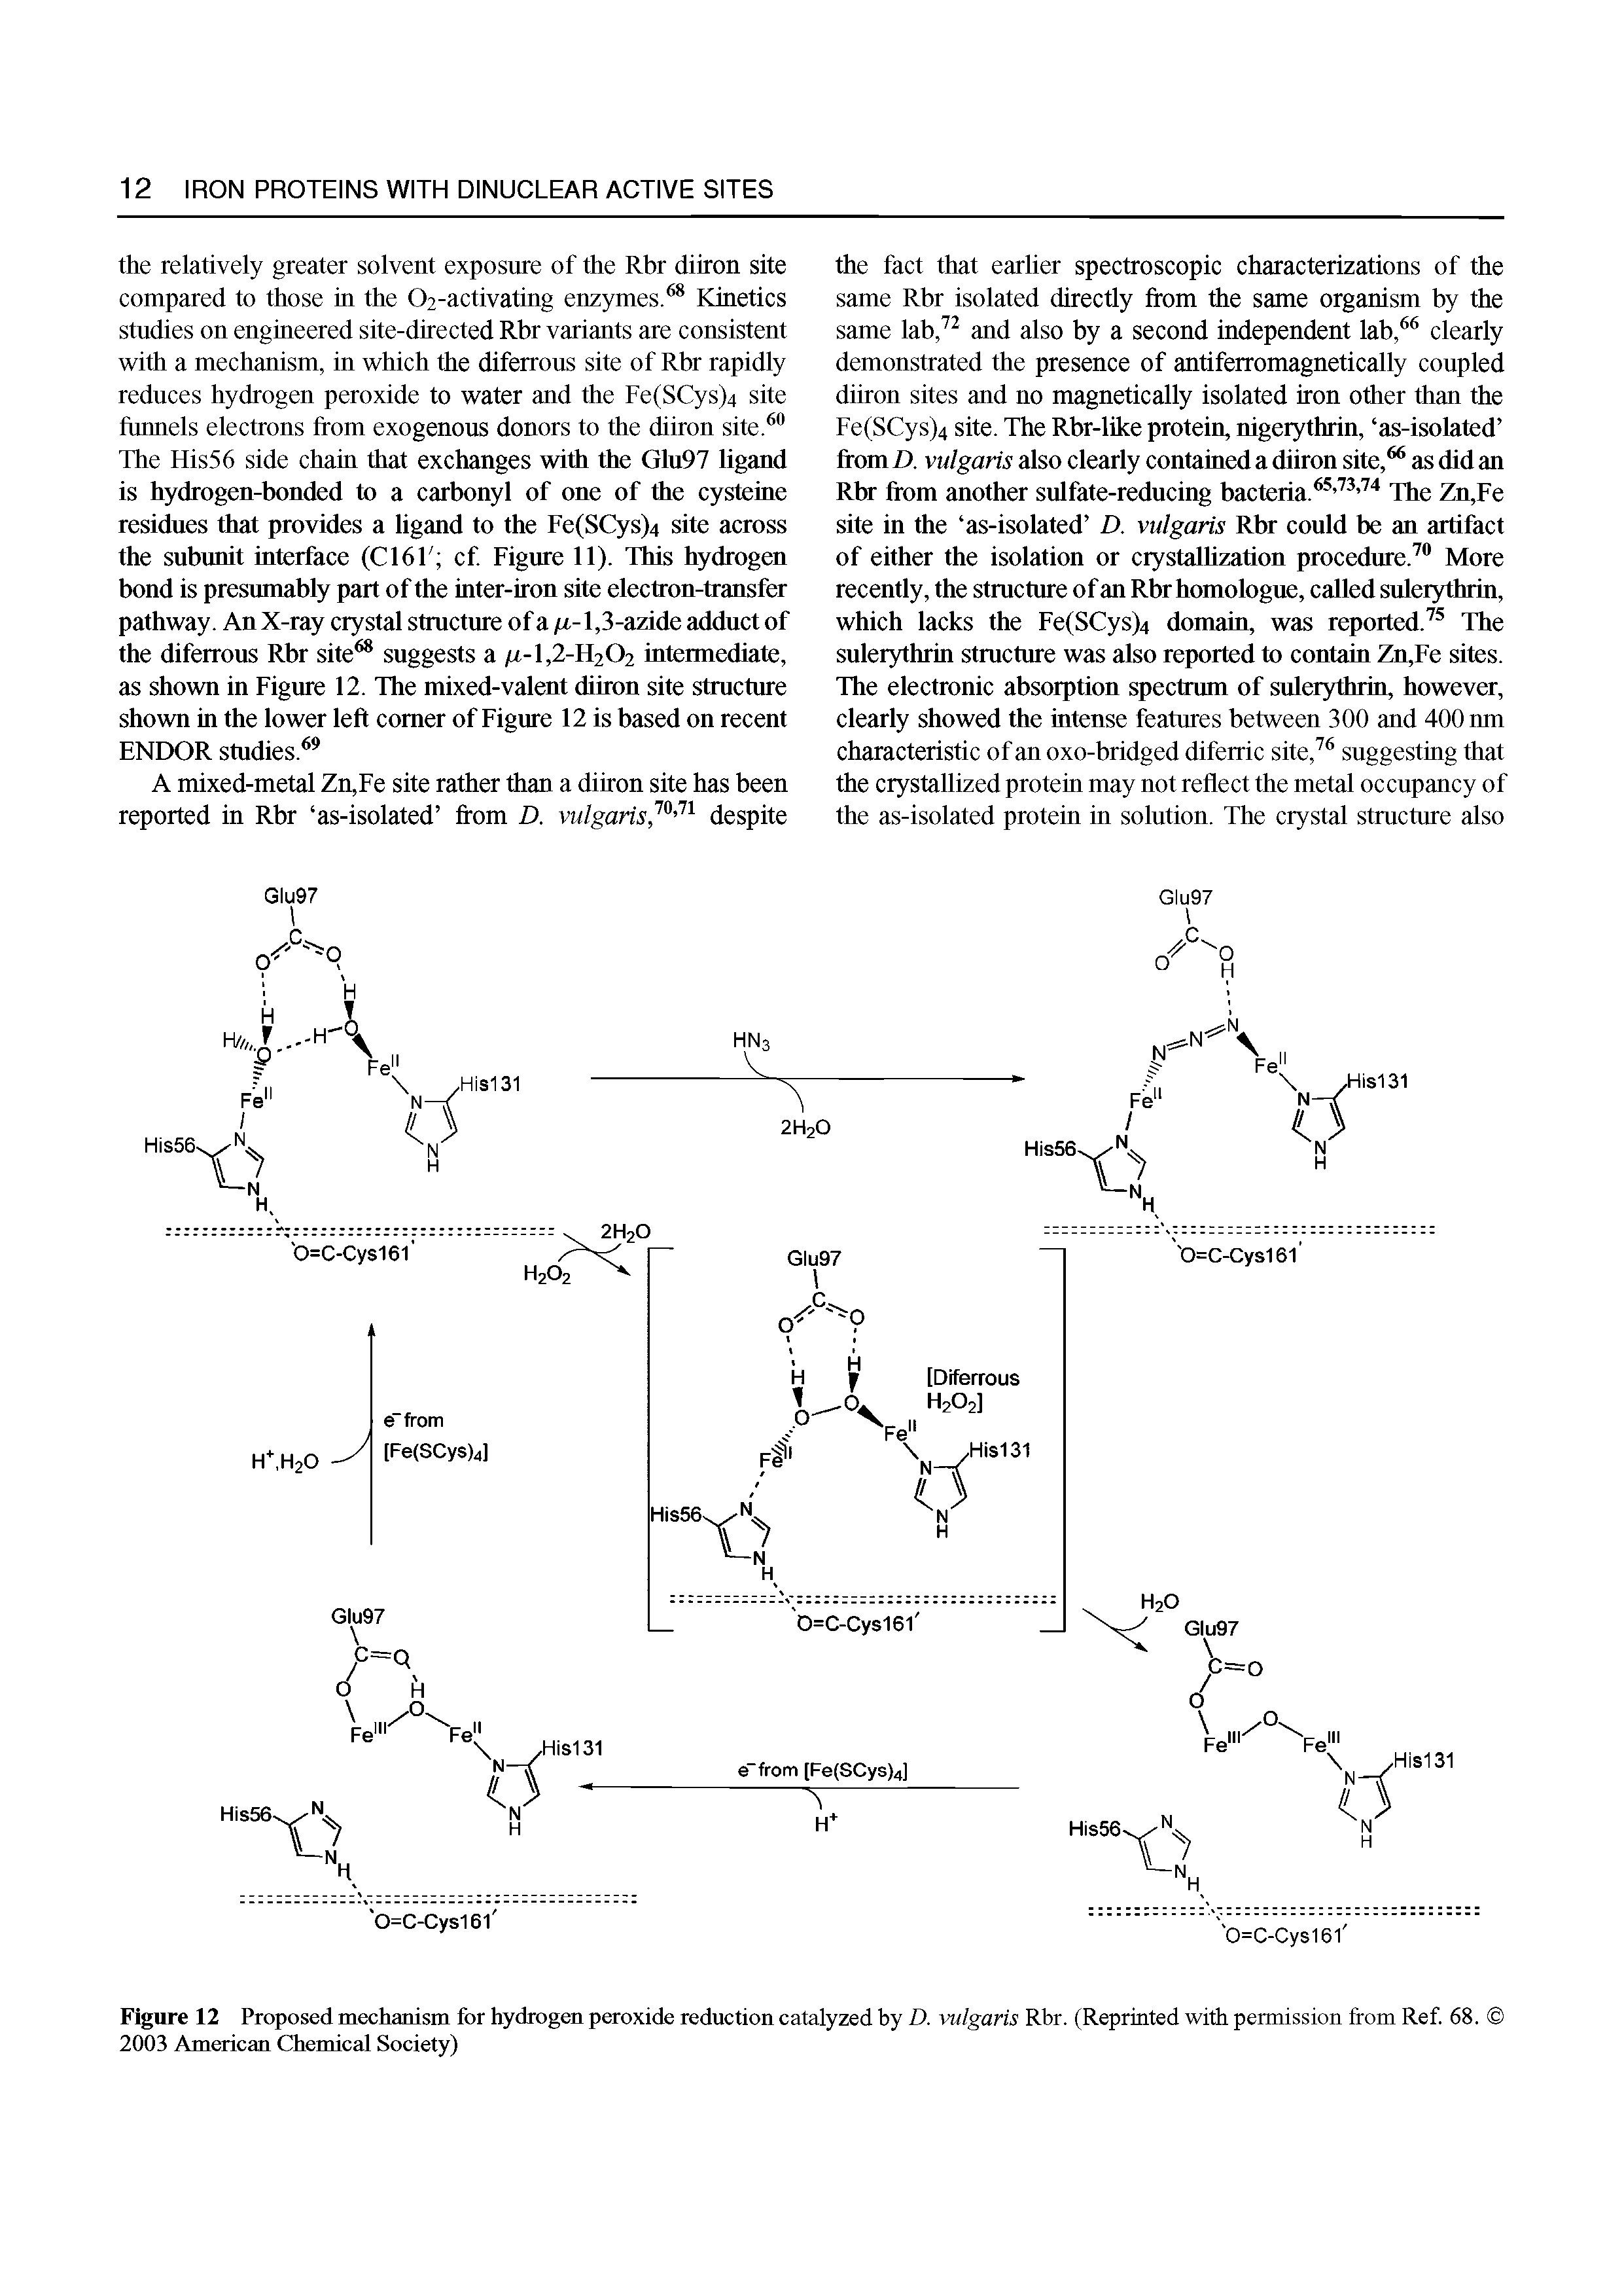 Figure 12 Proposed mechanism for hydrogen peroxide reduction catalyzed by D. vulgaris Rbr. (Reprinted with permission from Ref. 68. 2003 American Chemical Society)...